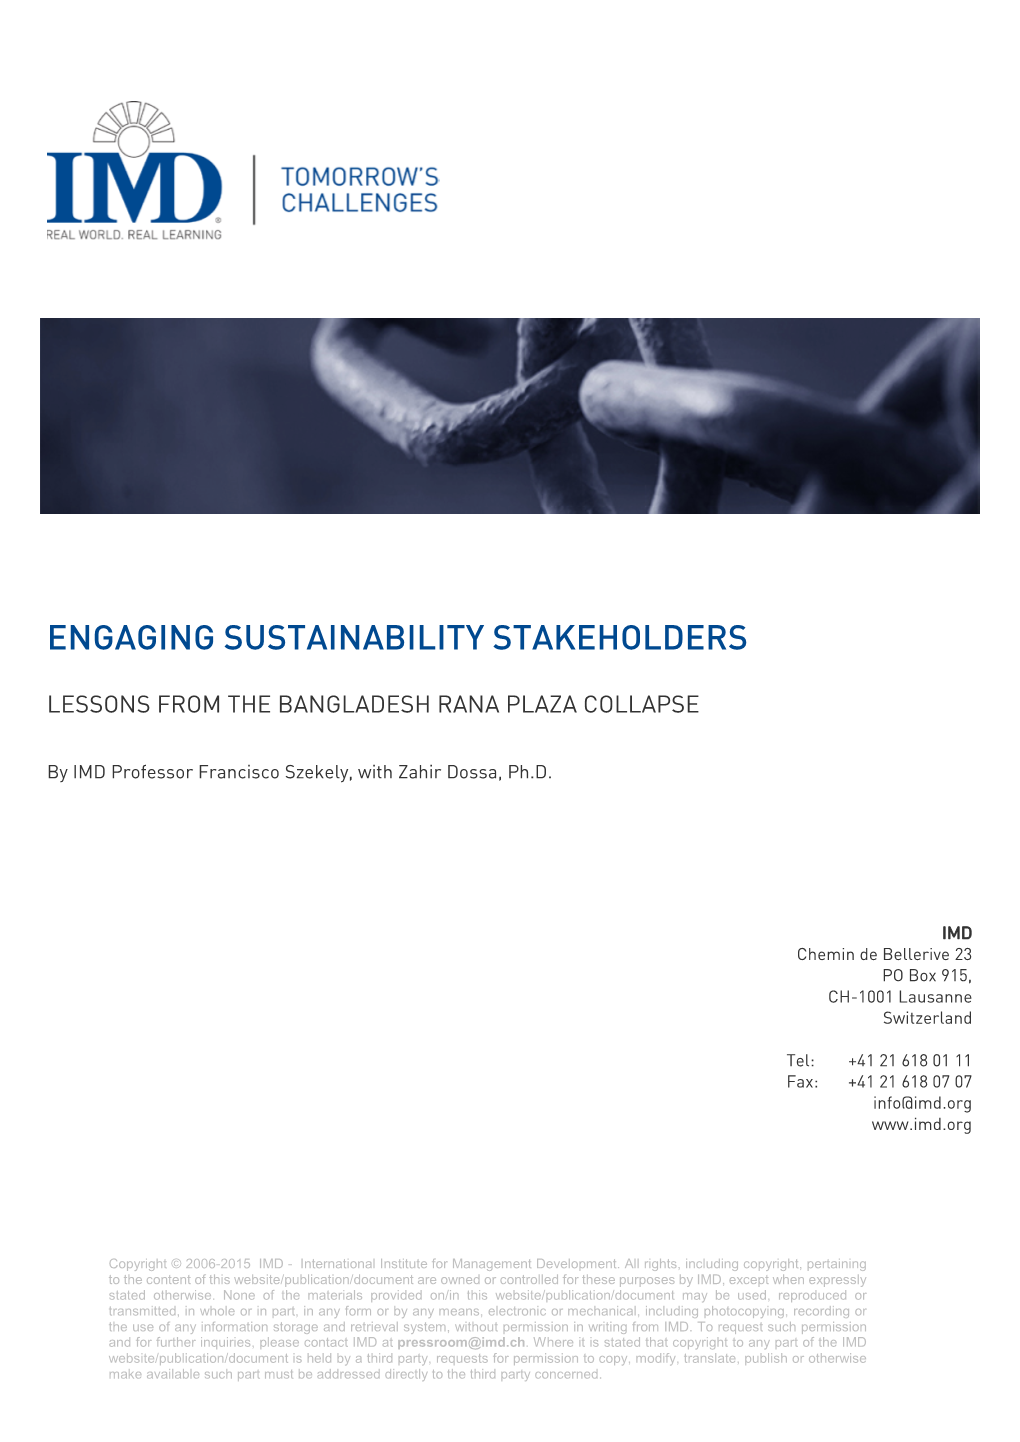 Engaging Sustainability Stakeholders